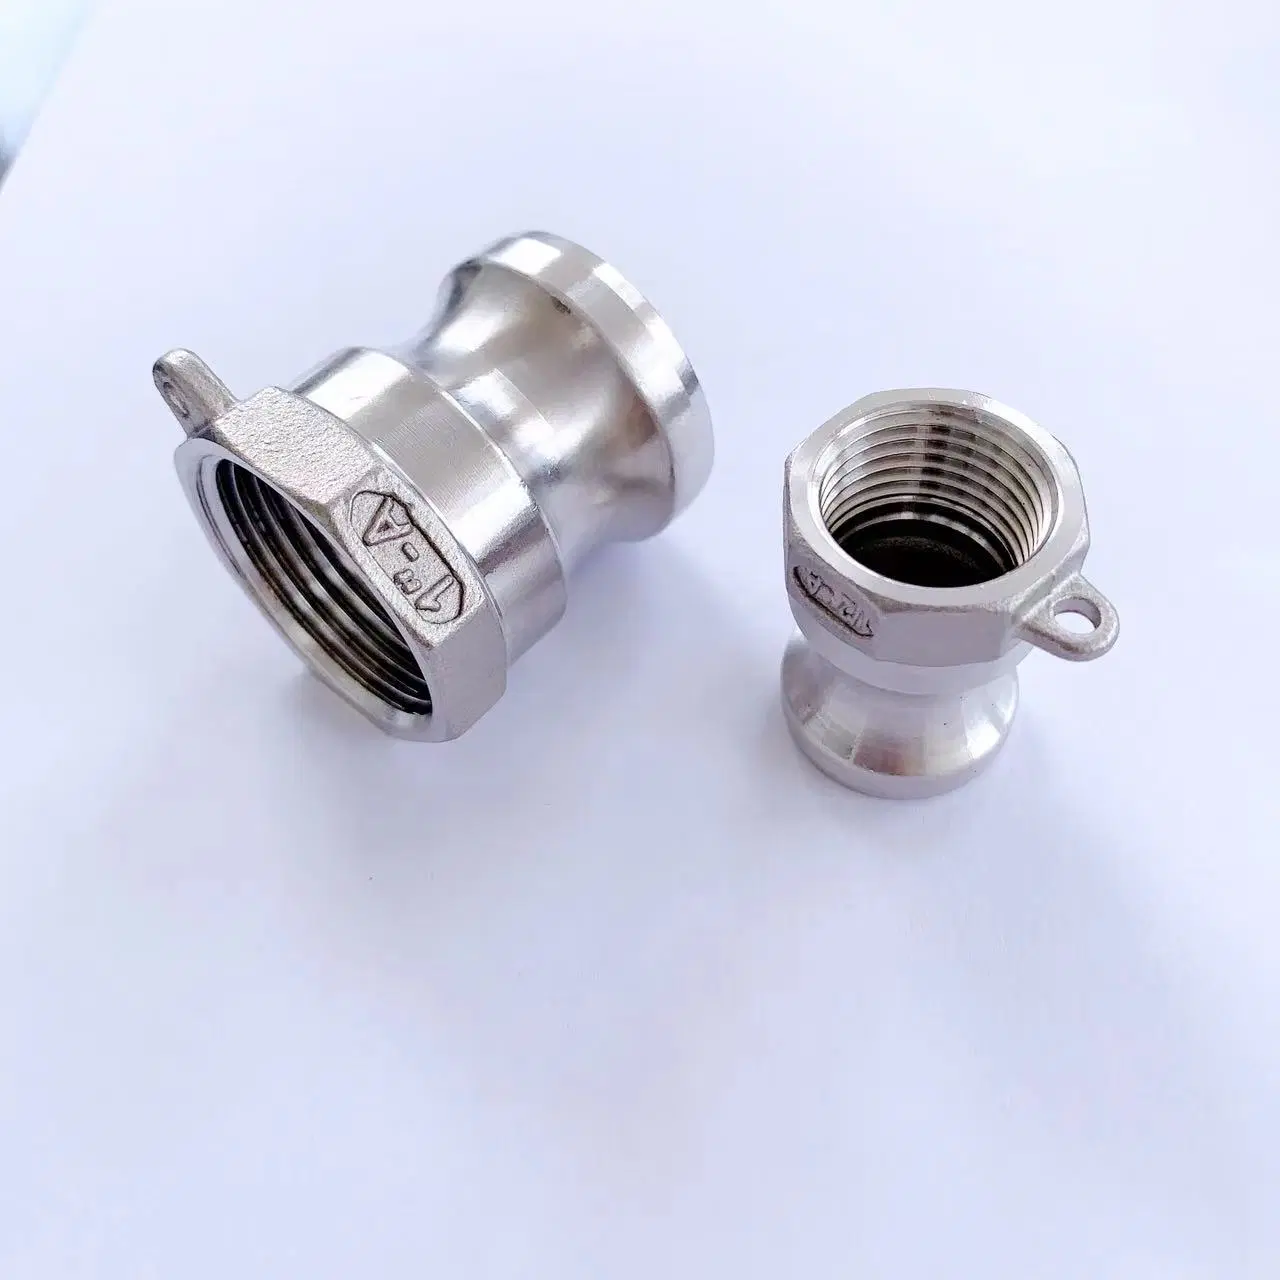 Stainless Steel Aluminum Camlock Coupling Quick Connector a